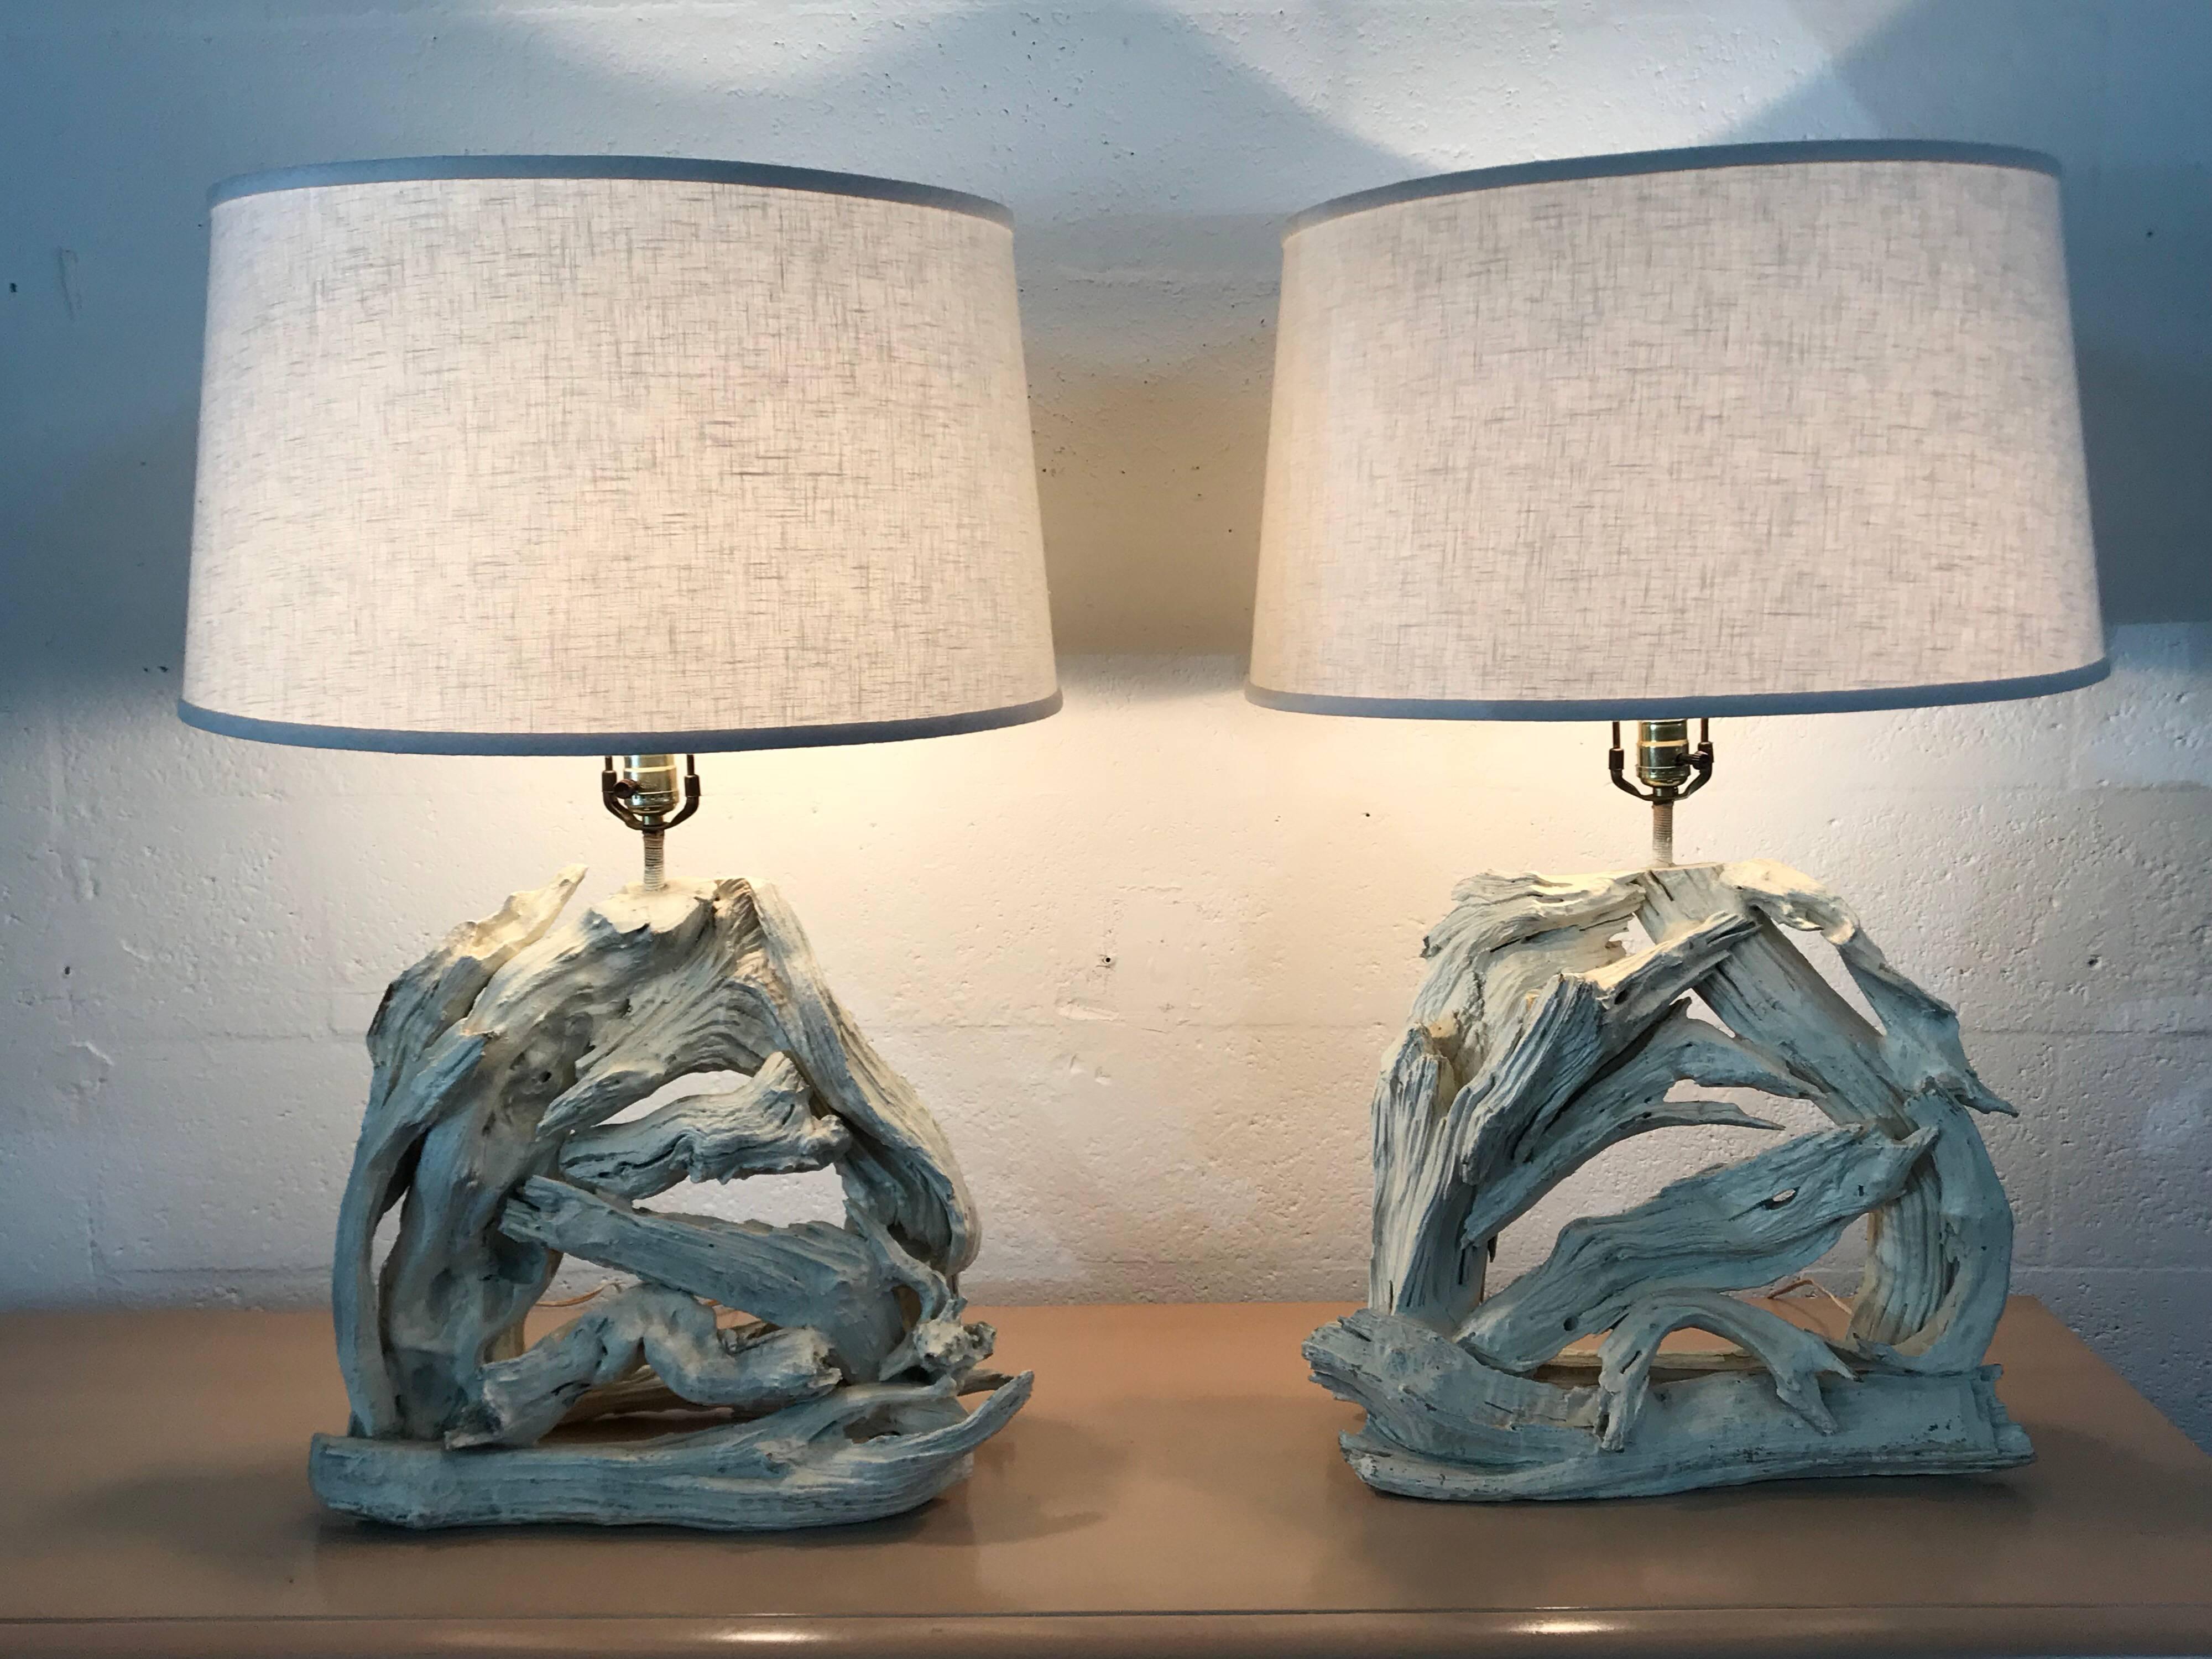 Large-scale pair of vintage driftwood lamps, Classic organic modern old Florida design.

Shades for display purpose only.